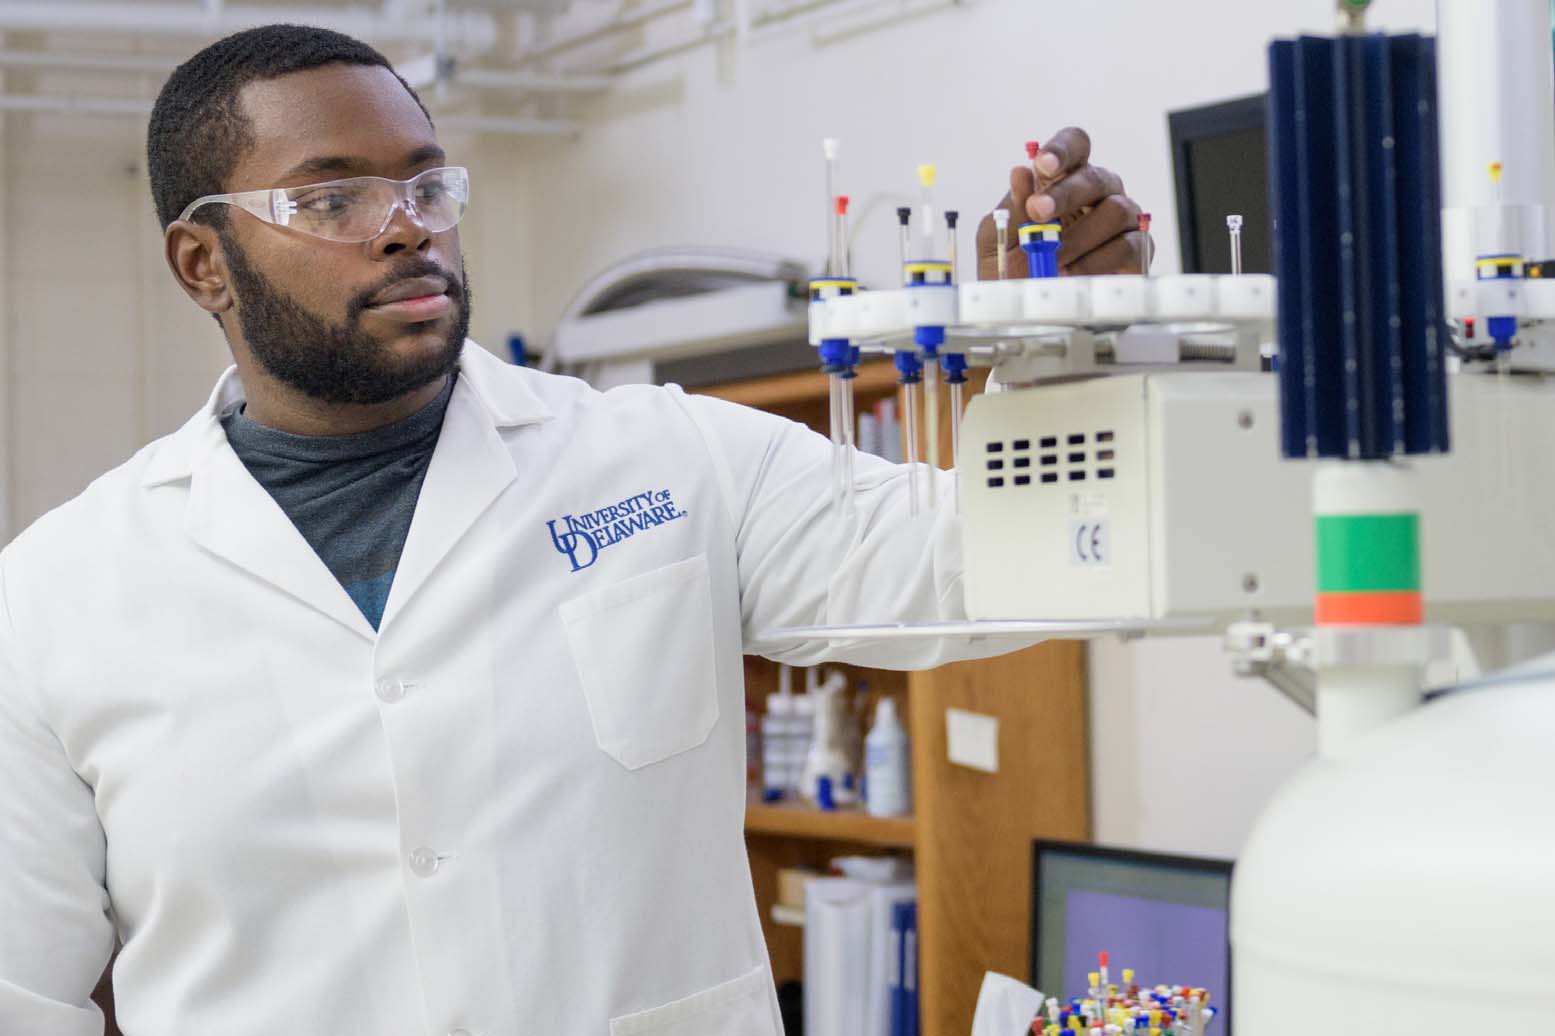 Graduate student works with test tubes in a lab.